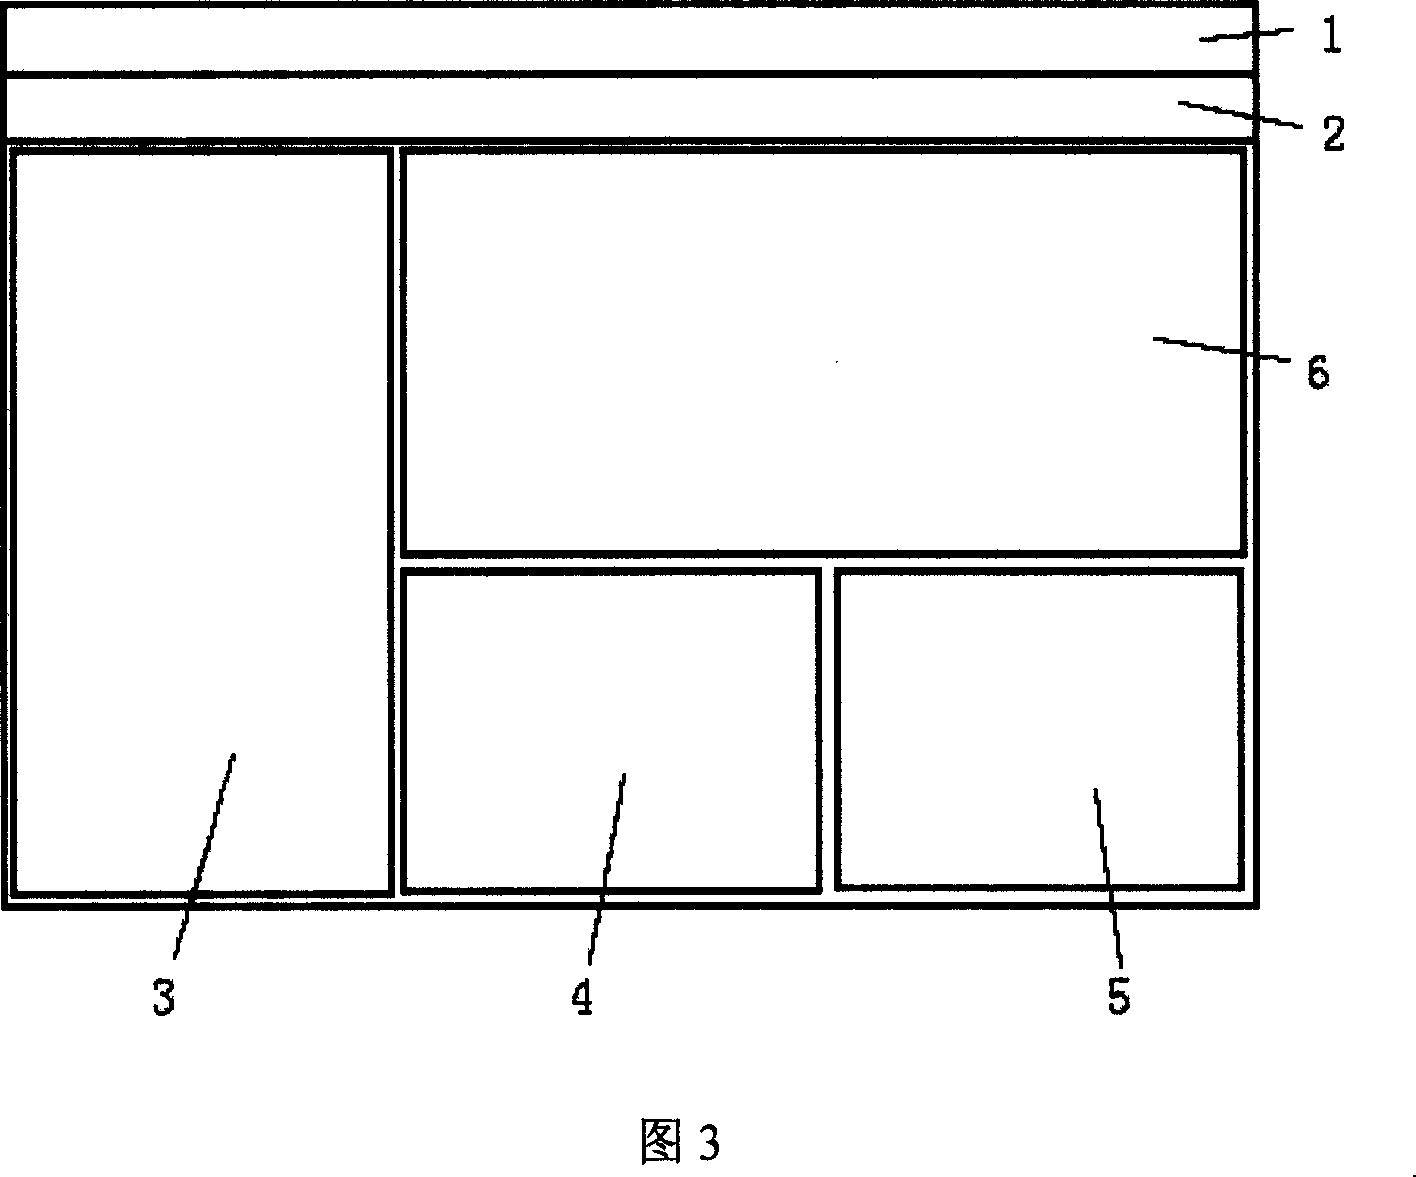 Method for making three-dimensional measurement of objects utilizing single digital camera to freely shoot